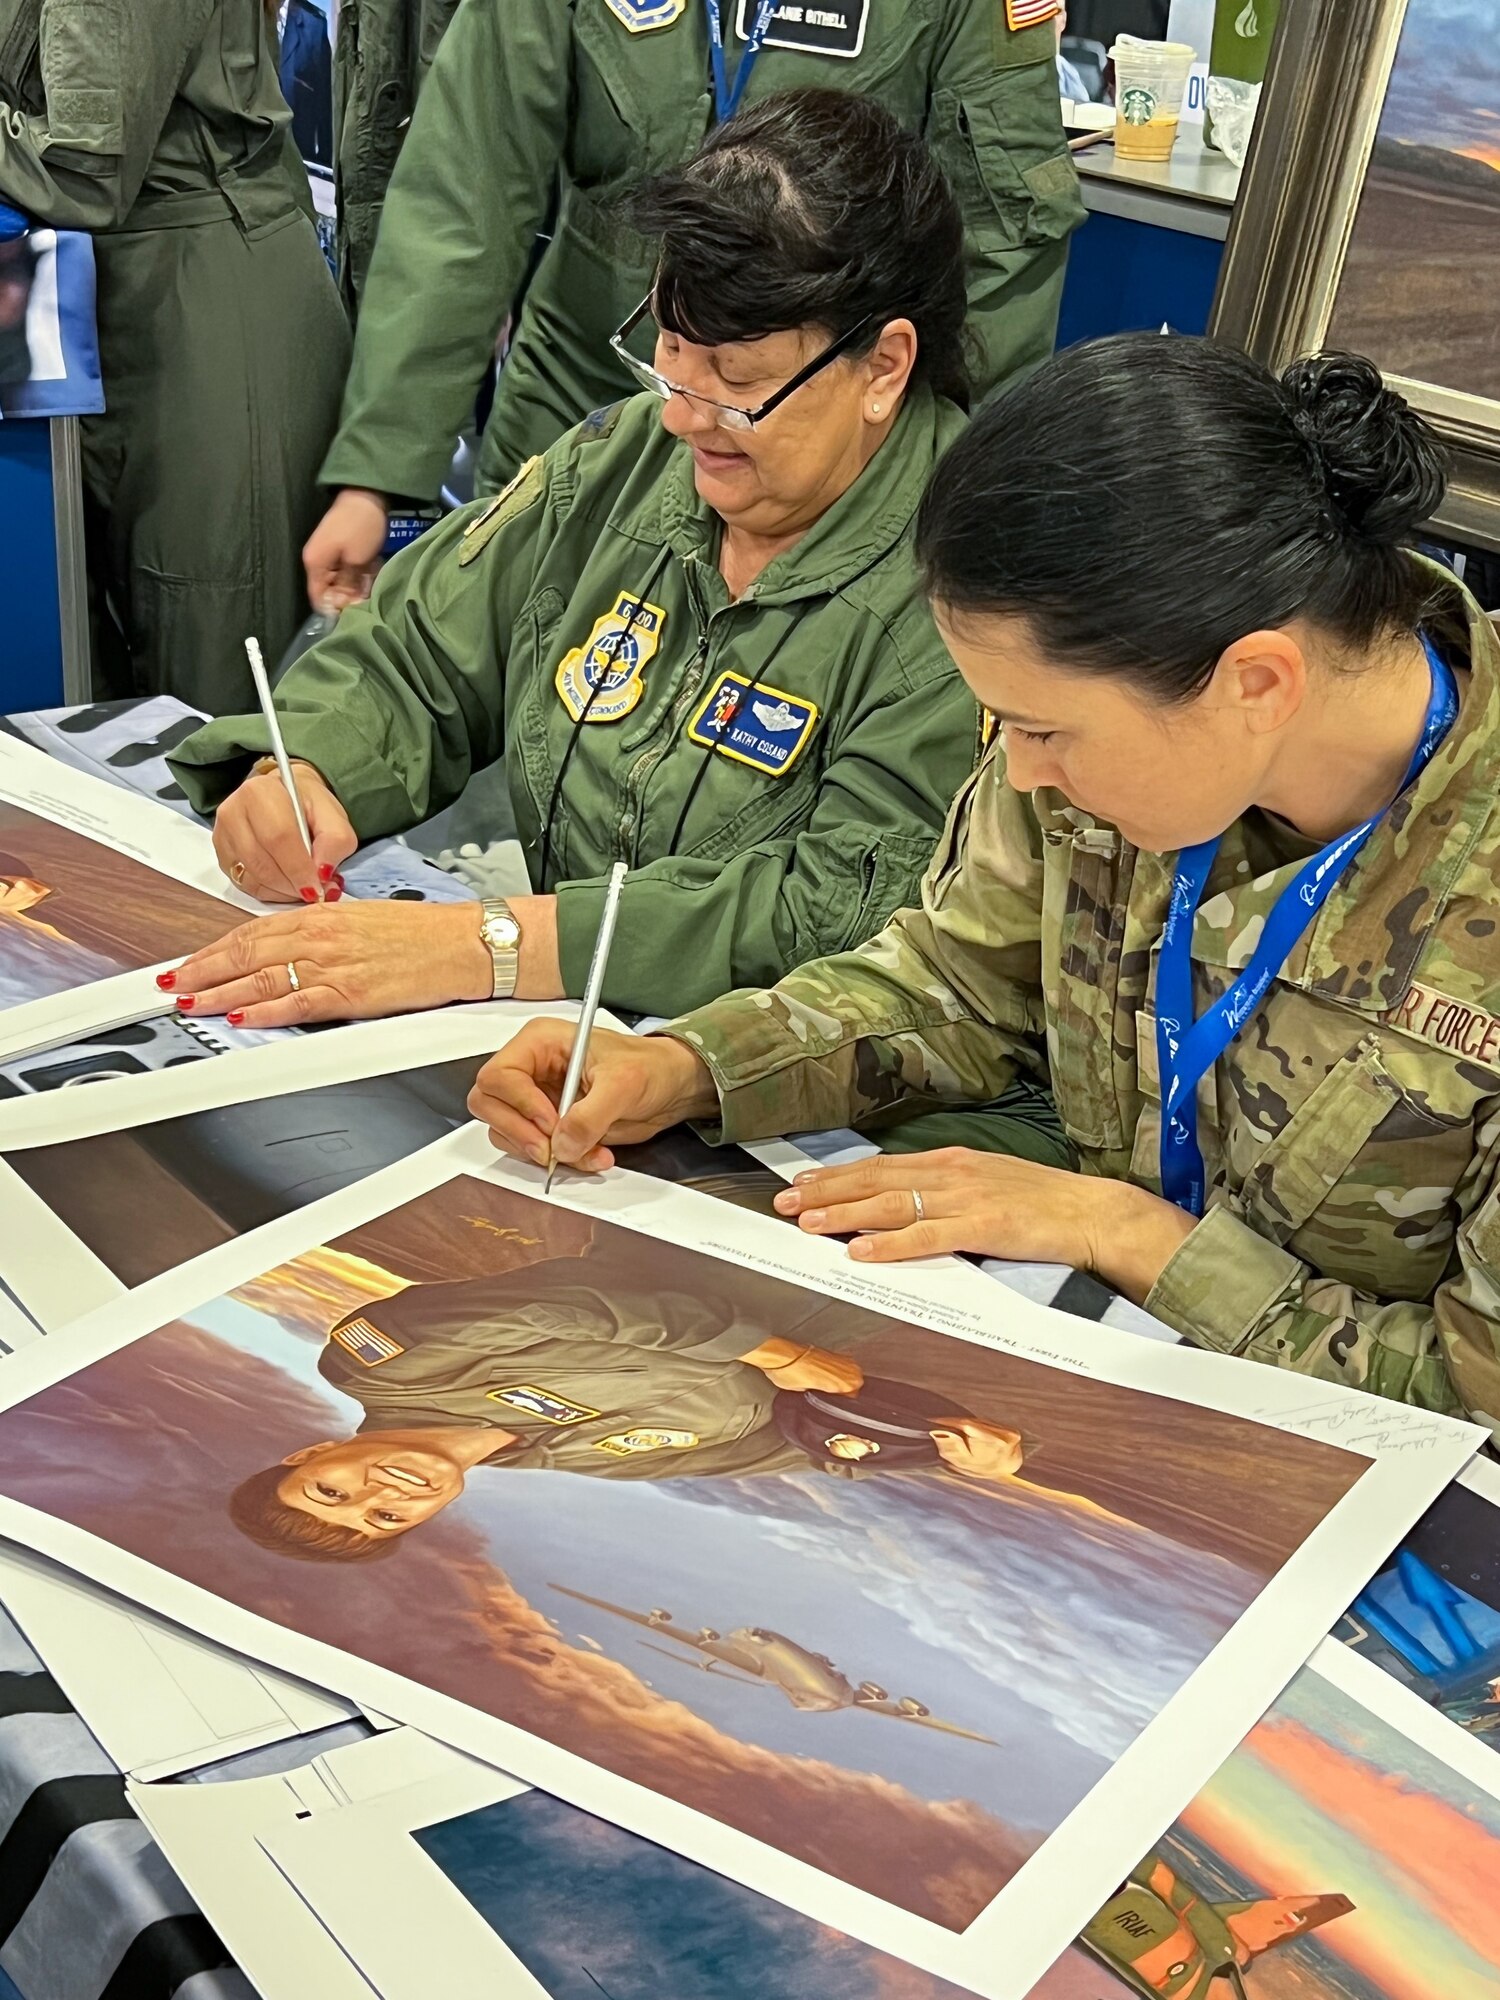 U.S. Air Force Reserve Col. (ret.) Kathy Cosand (left), AFRC’s first female pilot, and 2nd Lt. Kat Justen (right), Air Force Reserve Command Office of History and Heritage combat artist, sign lithographs